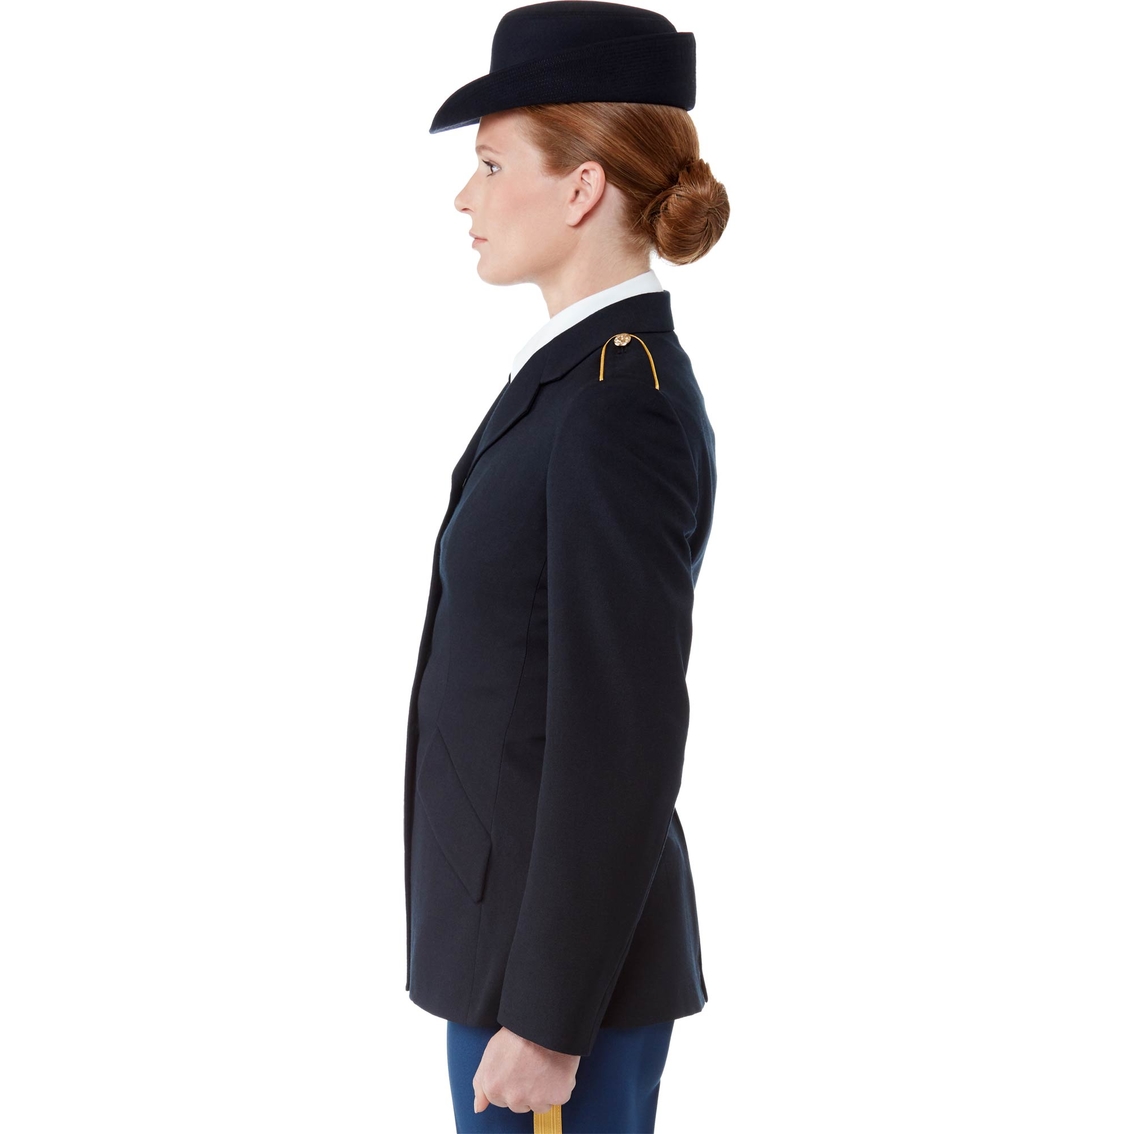 Army Women's Enlisted Blue Coat (ASU) - Image 4 of 4